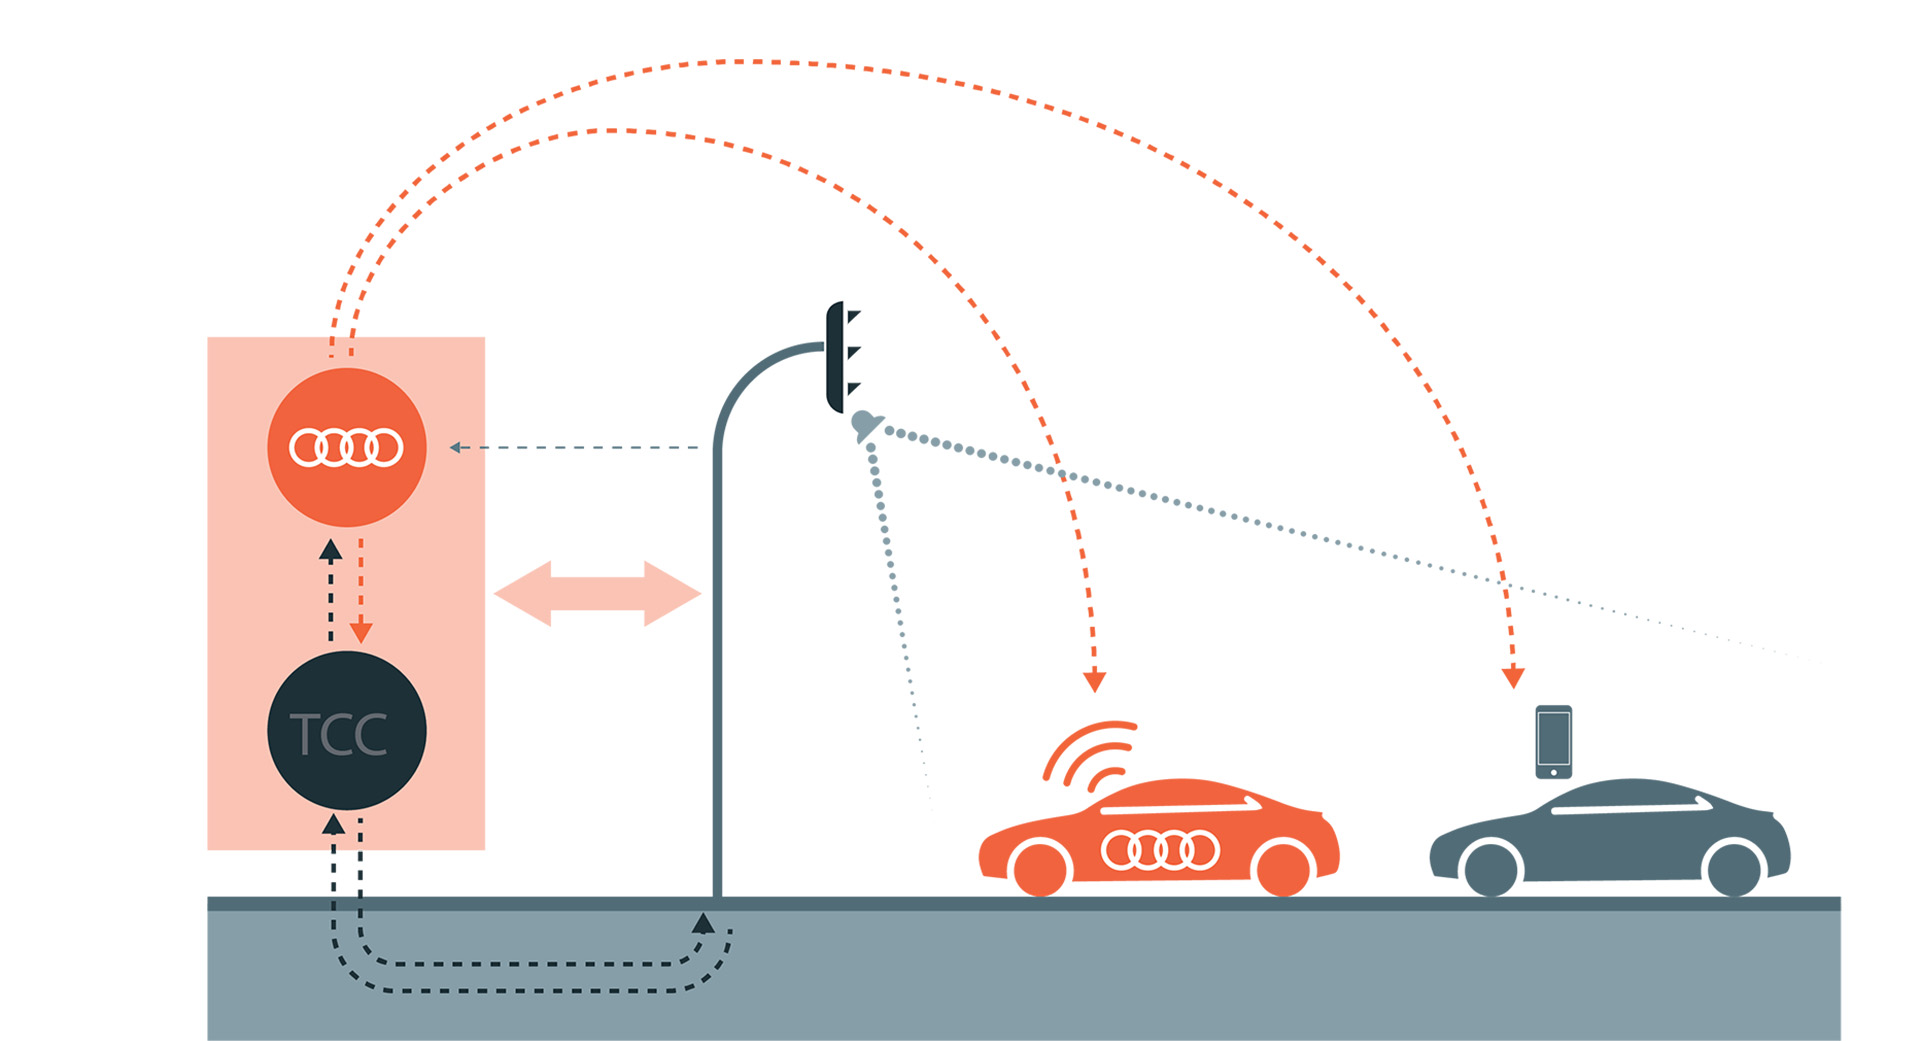 Wireless communication between cars and urban devices